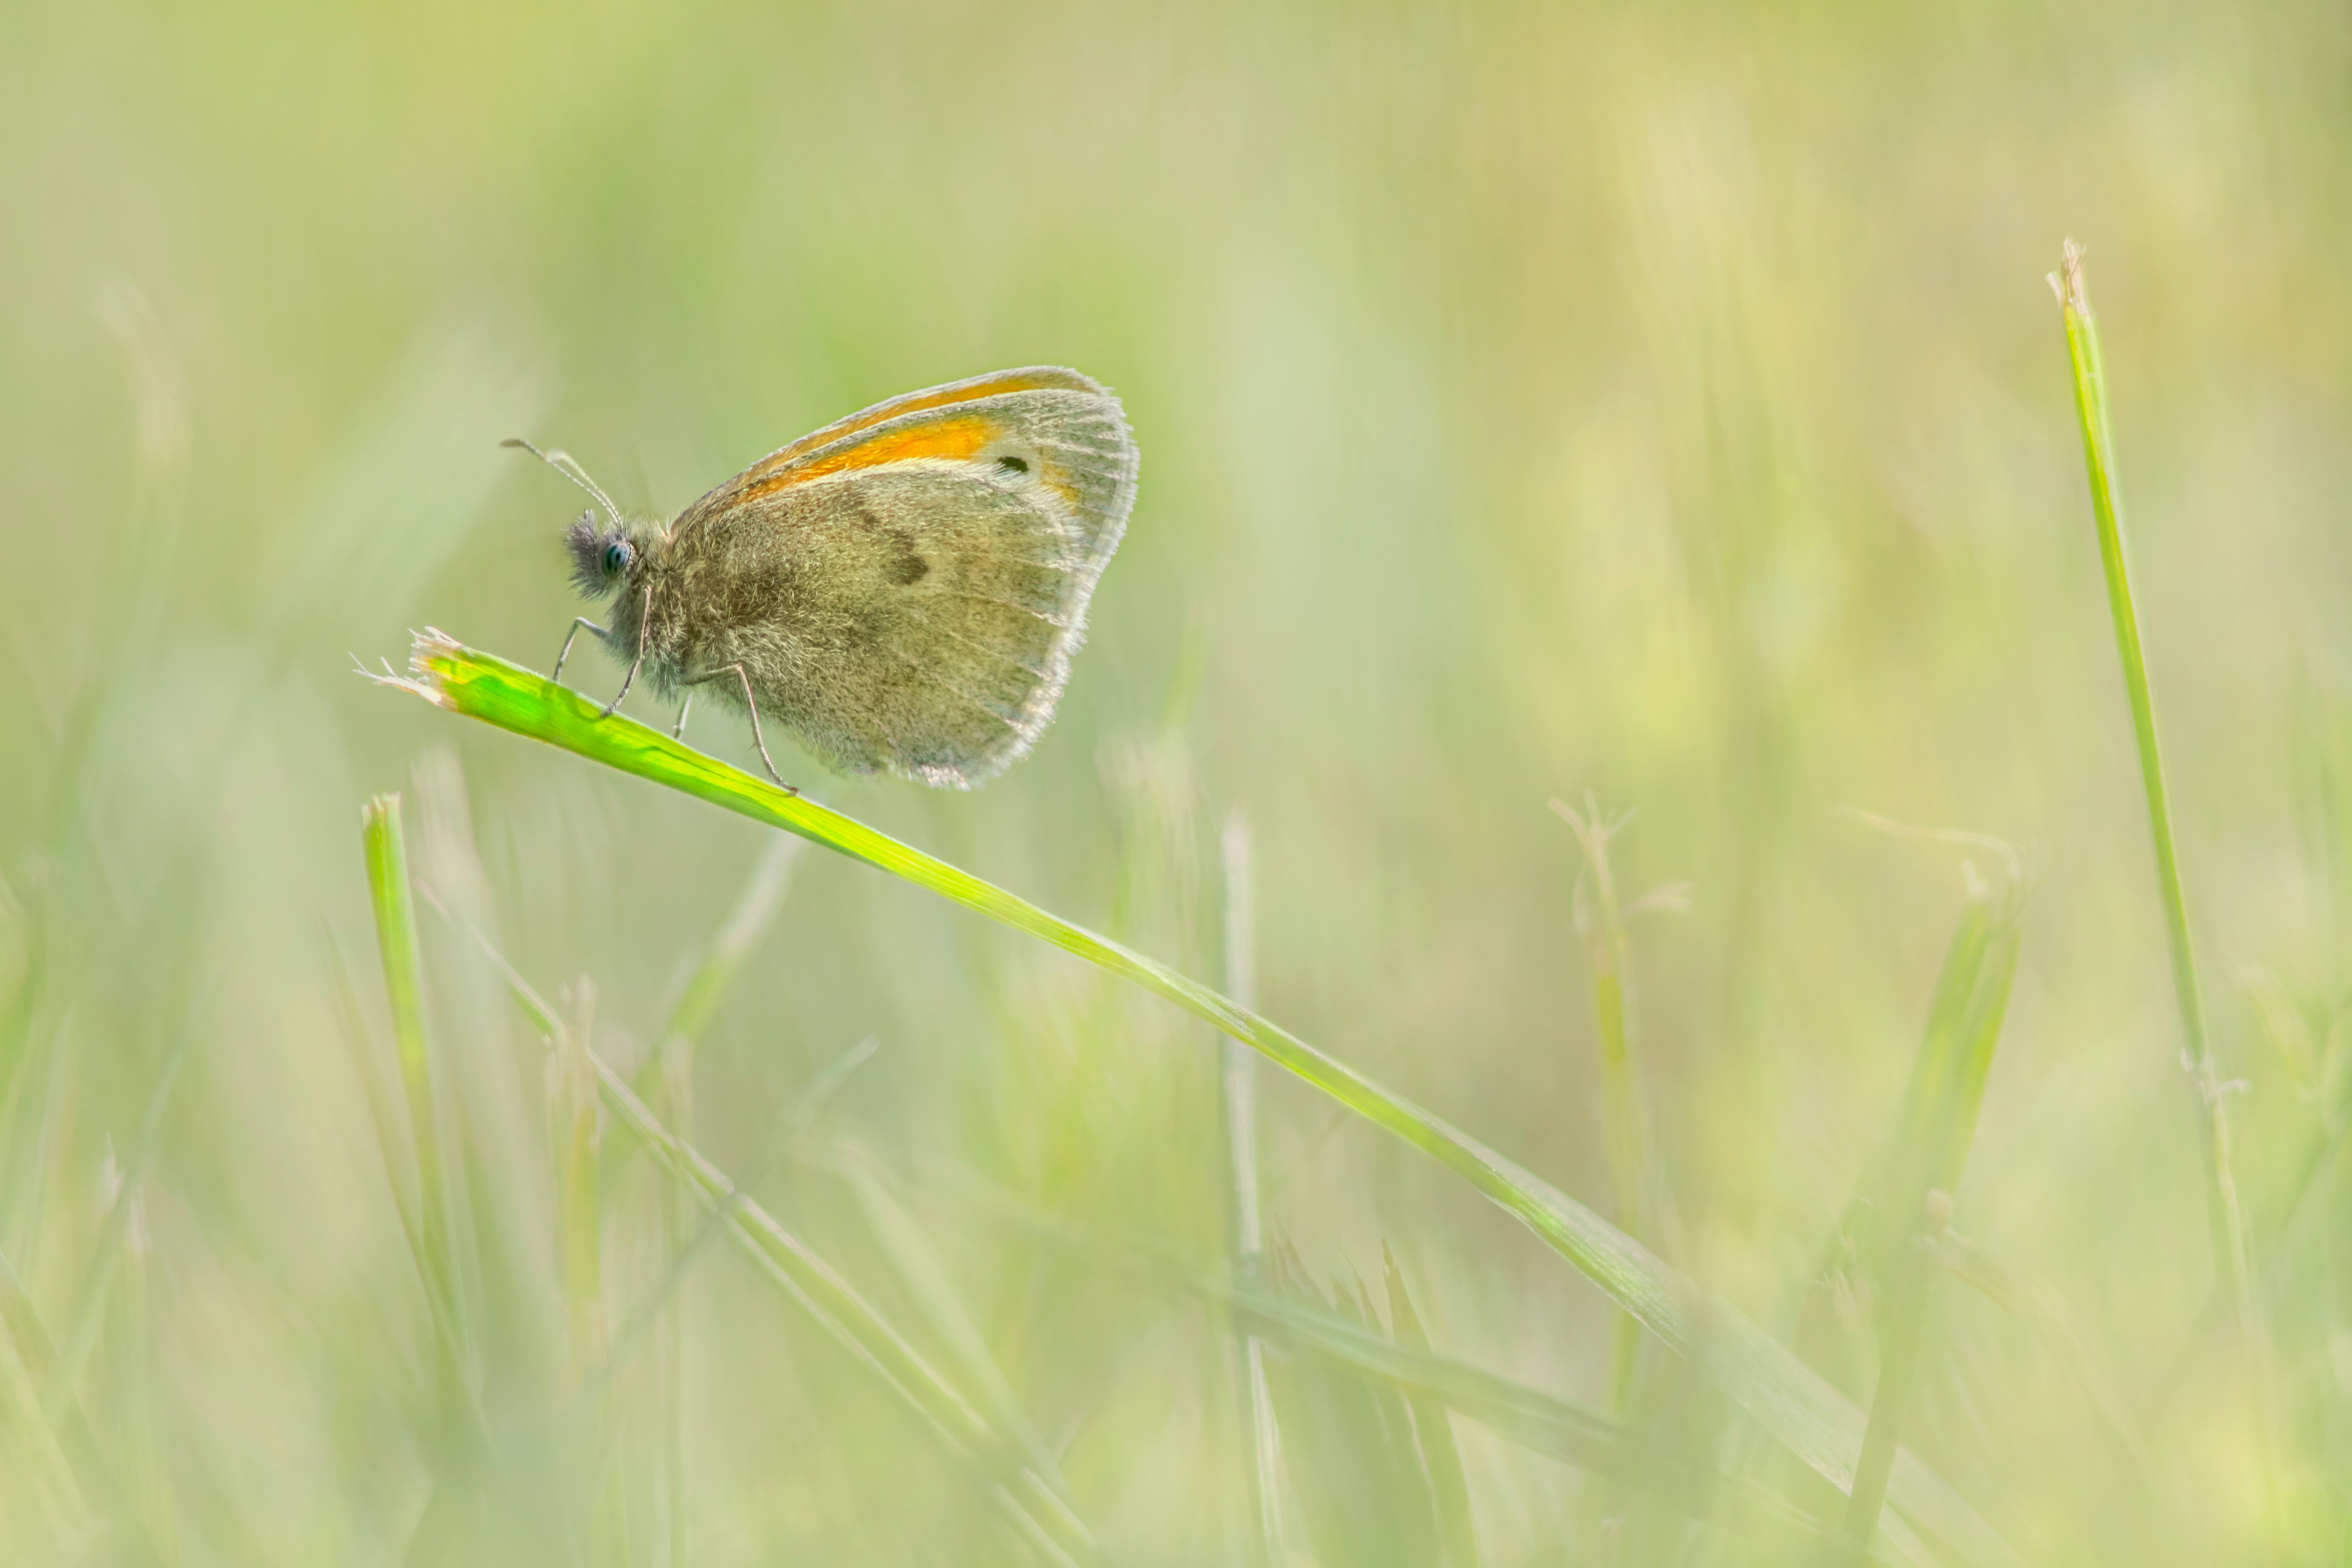 brown butterfly perched on green grass in close up photography during daytime